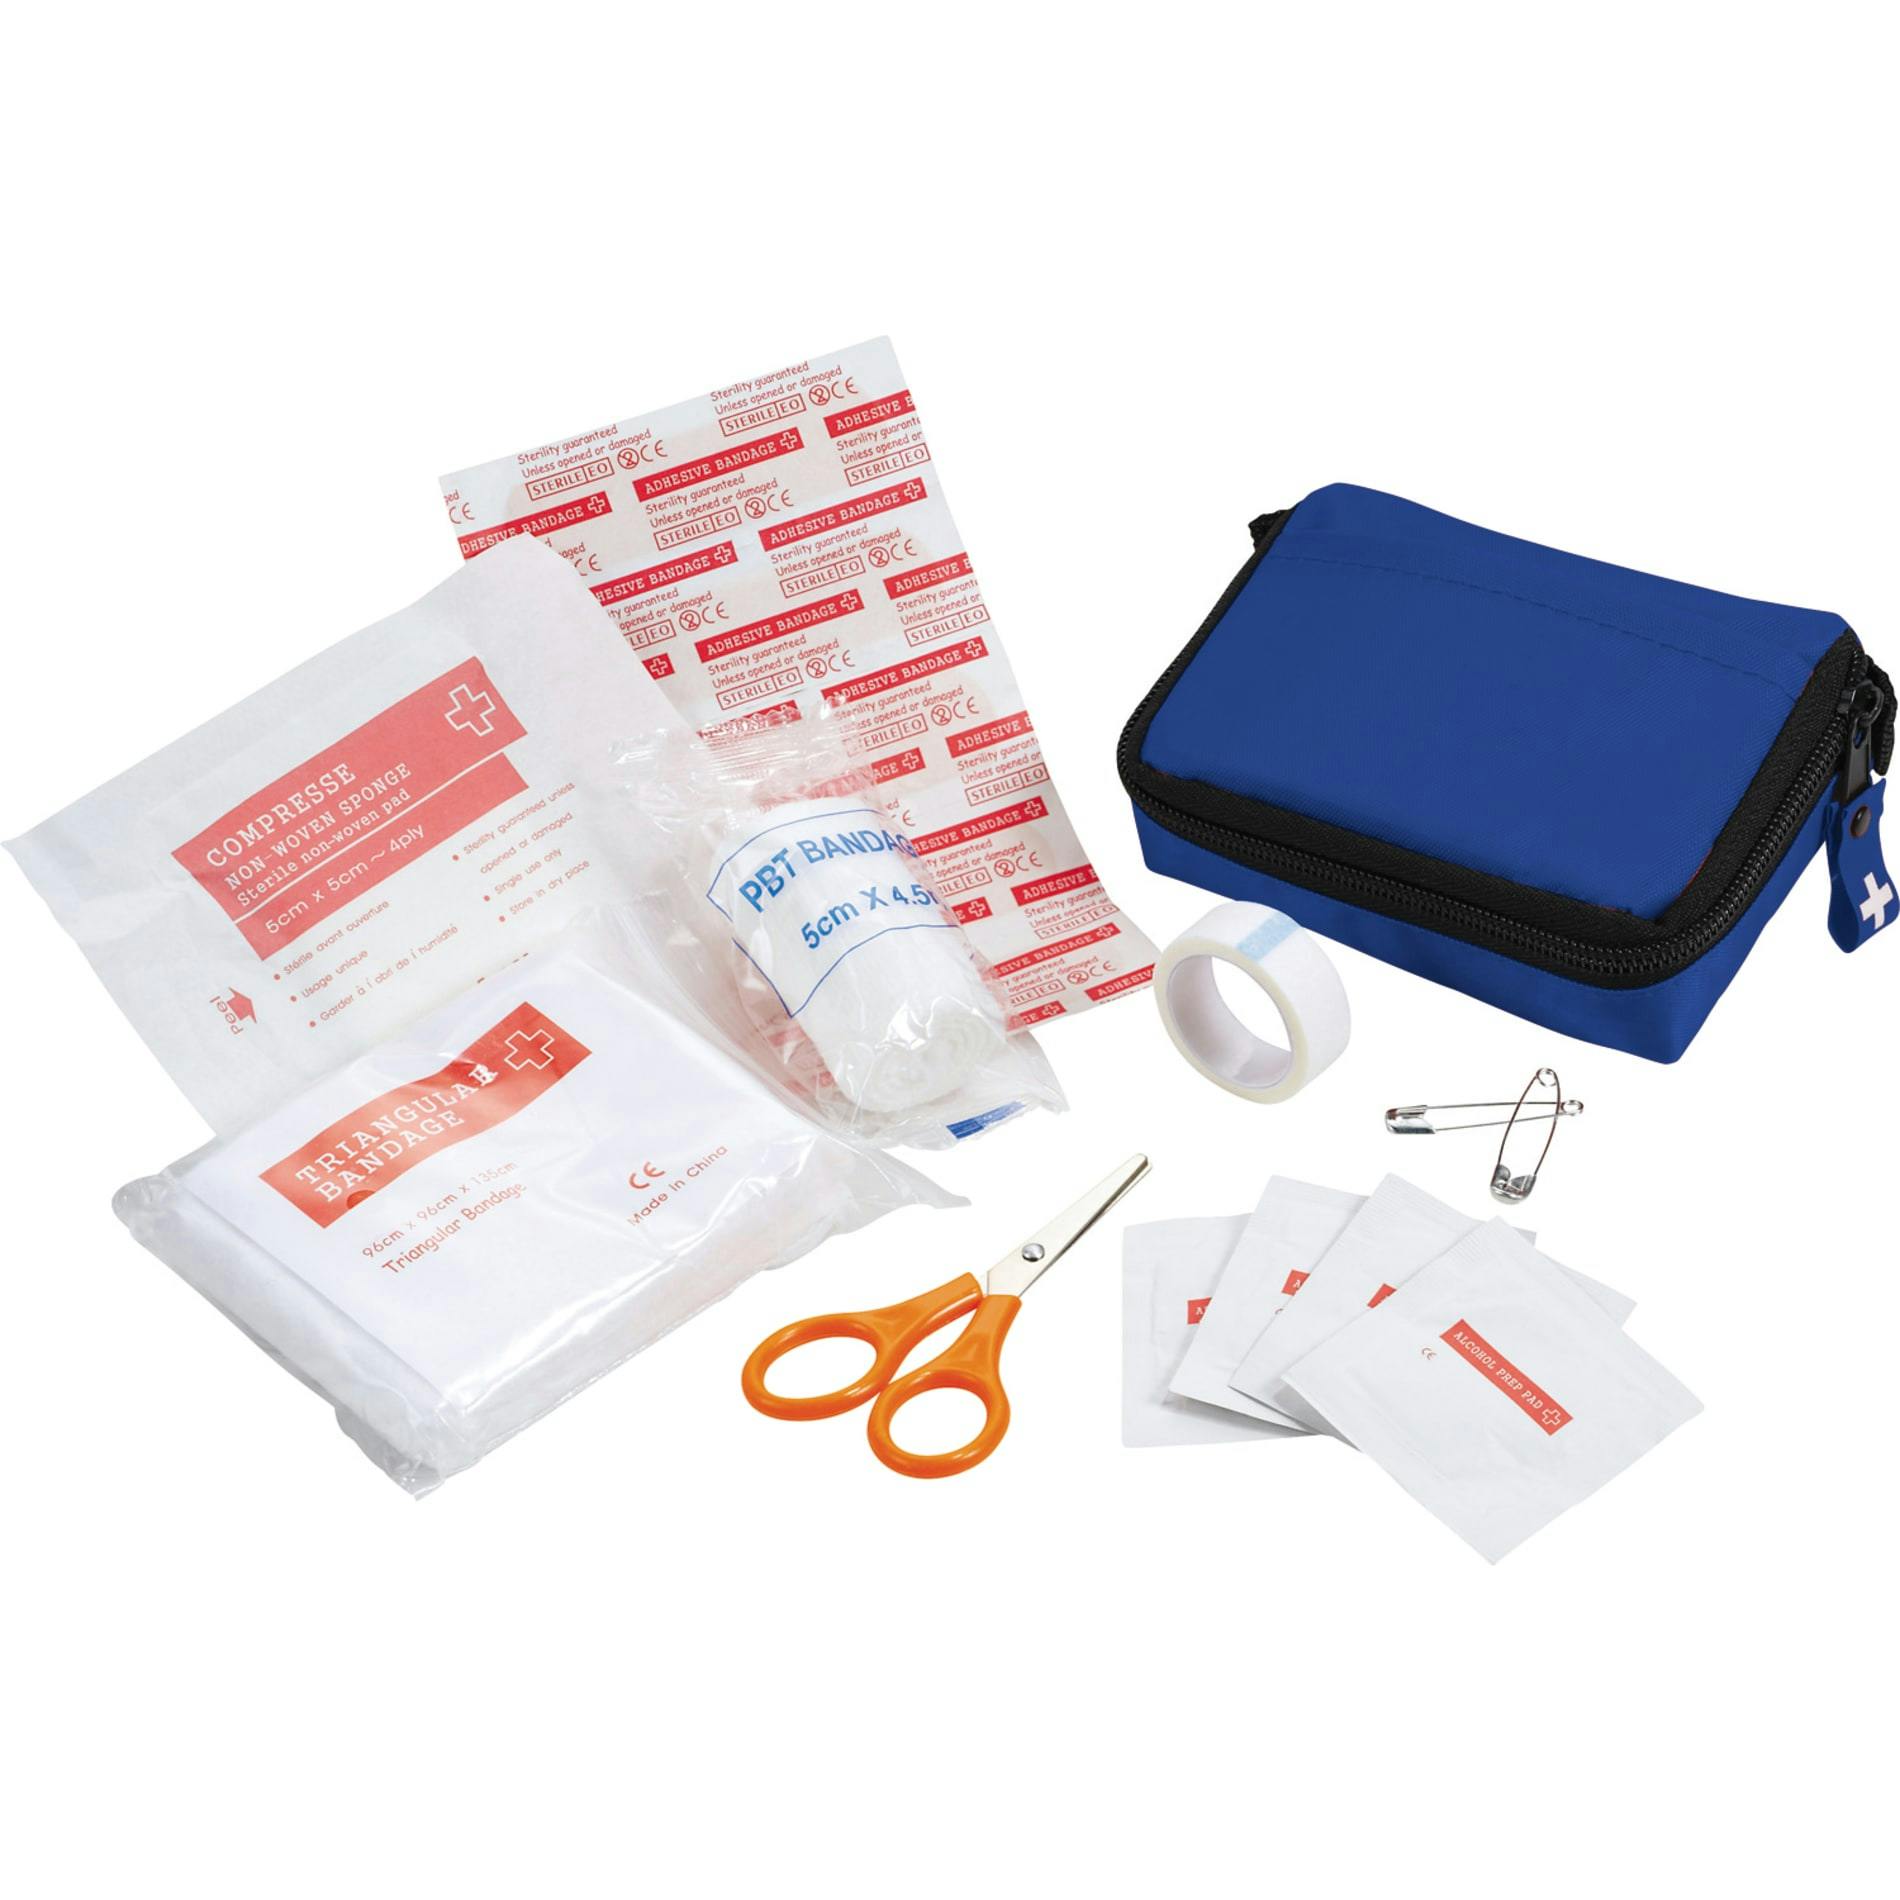 Bolt 20-Piece First Aid Kit - additional Image 1